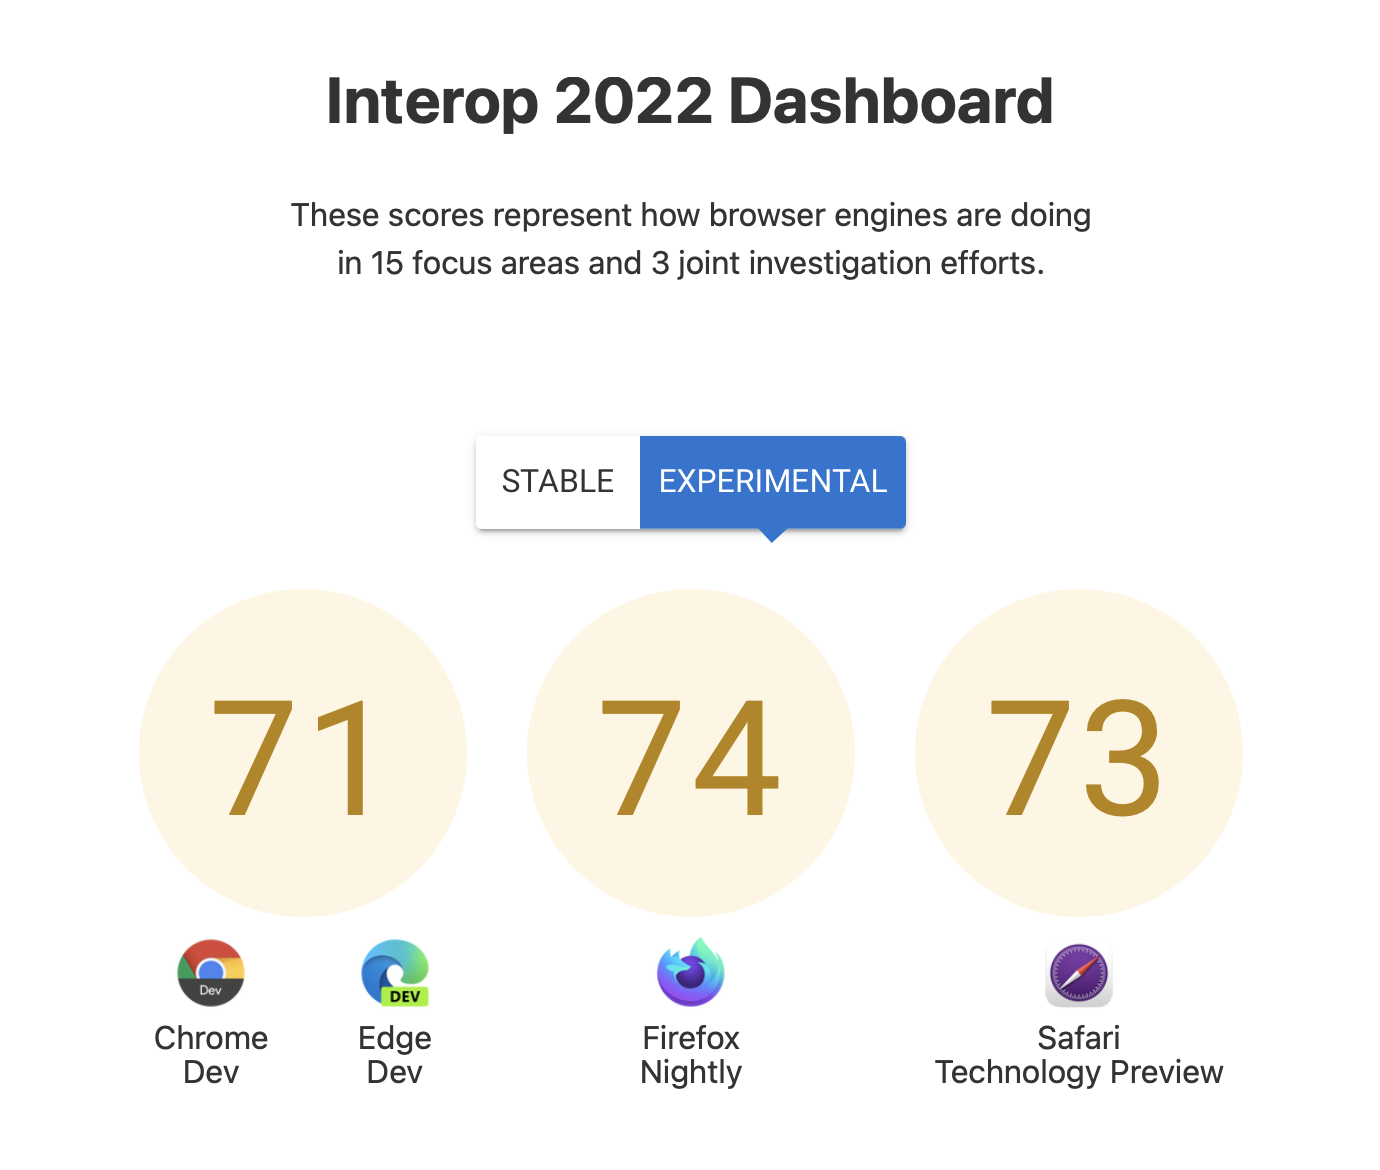 a screenshot of the Interop 2022 dashboard, showing starting scores of: Chrome and Edge Dev, 71. Firefox Nightly, 74. And Safari Technology Preview: 73.